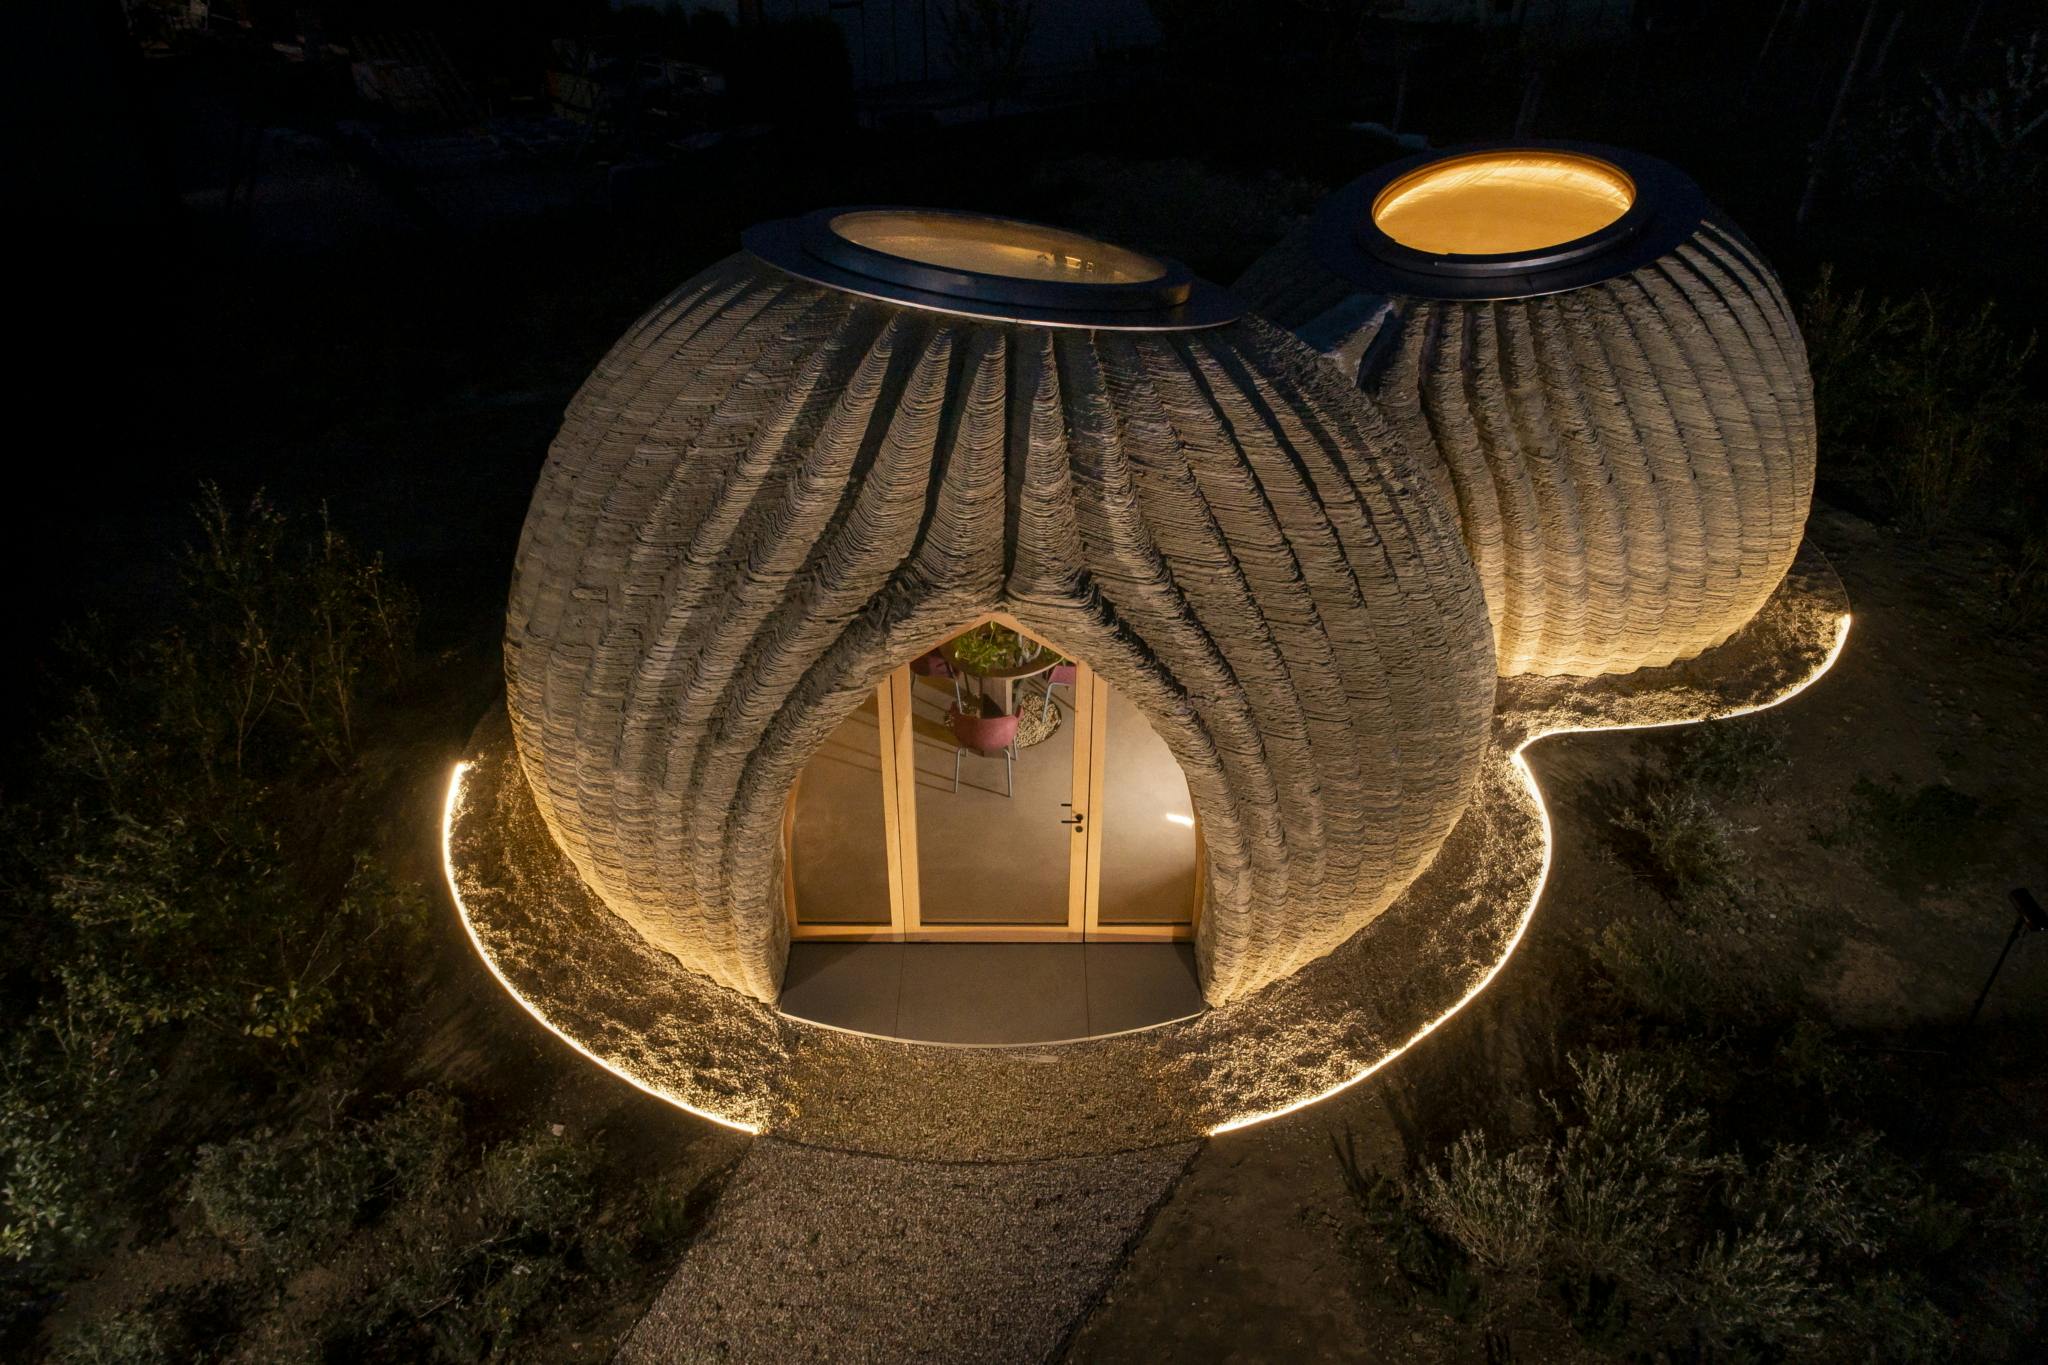 TECLA 3 D printed clay house credit WASP and Mario Cucinella Architects